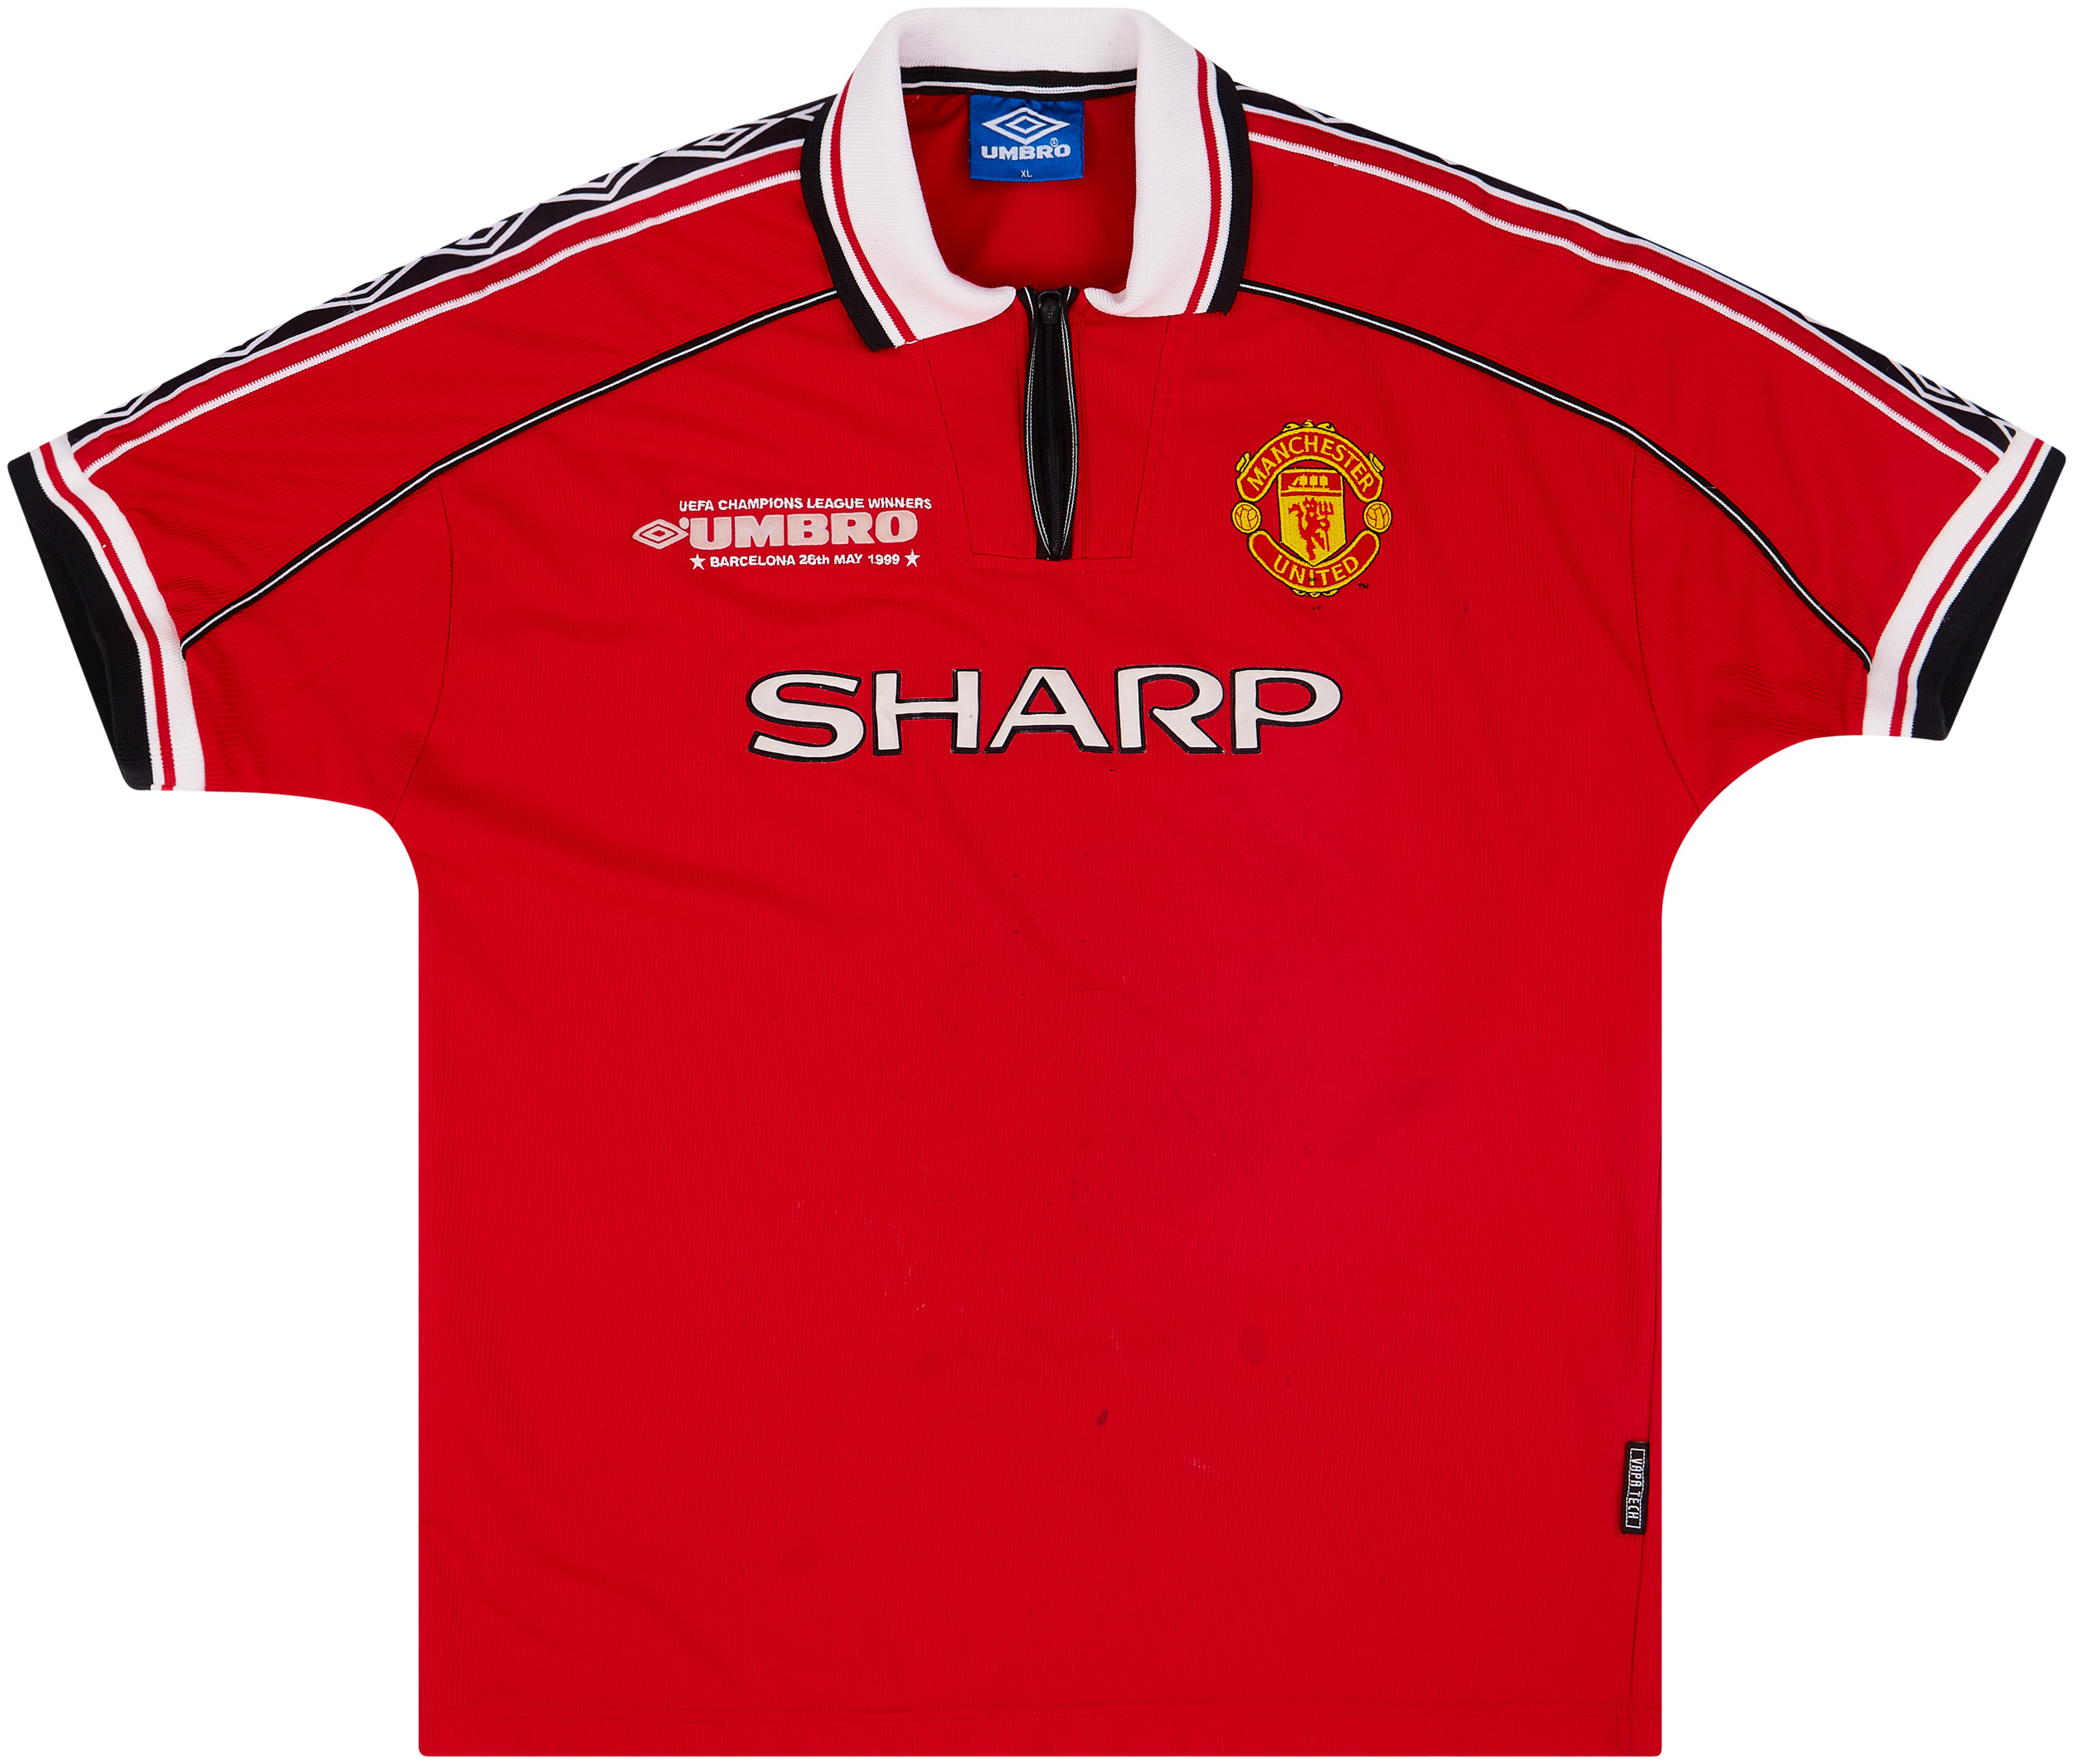 1998-00 Manchester United 'Champions League Winners' Home Shirt - 5/10 - ()